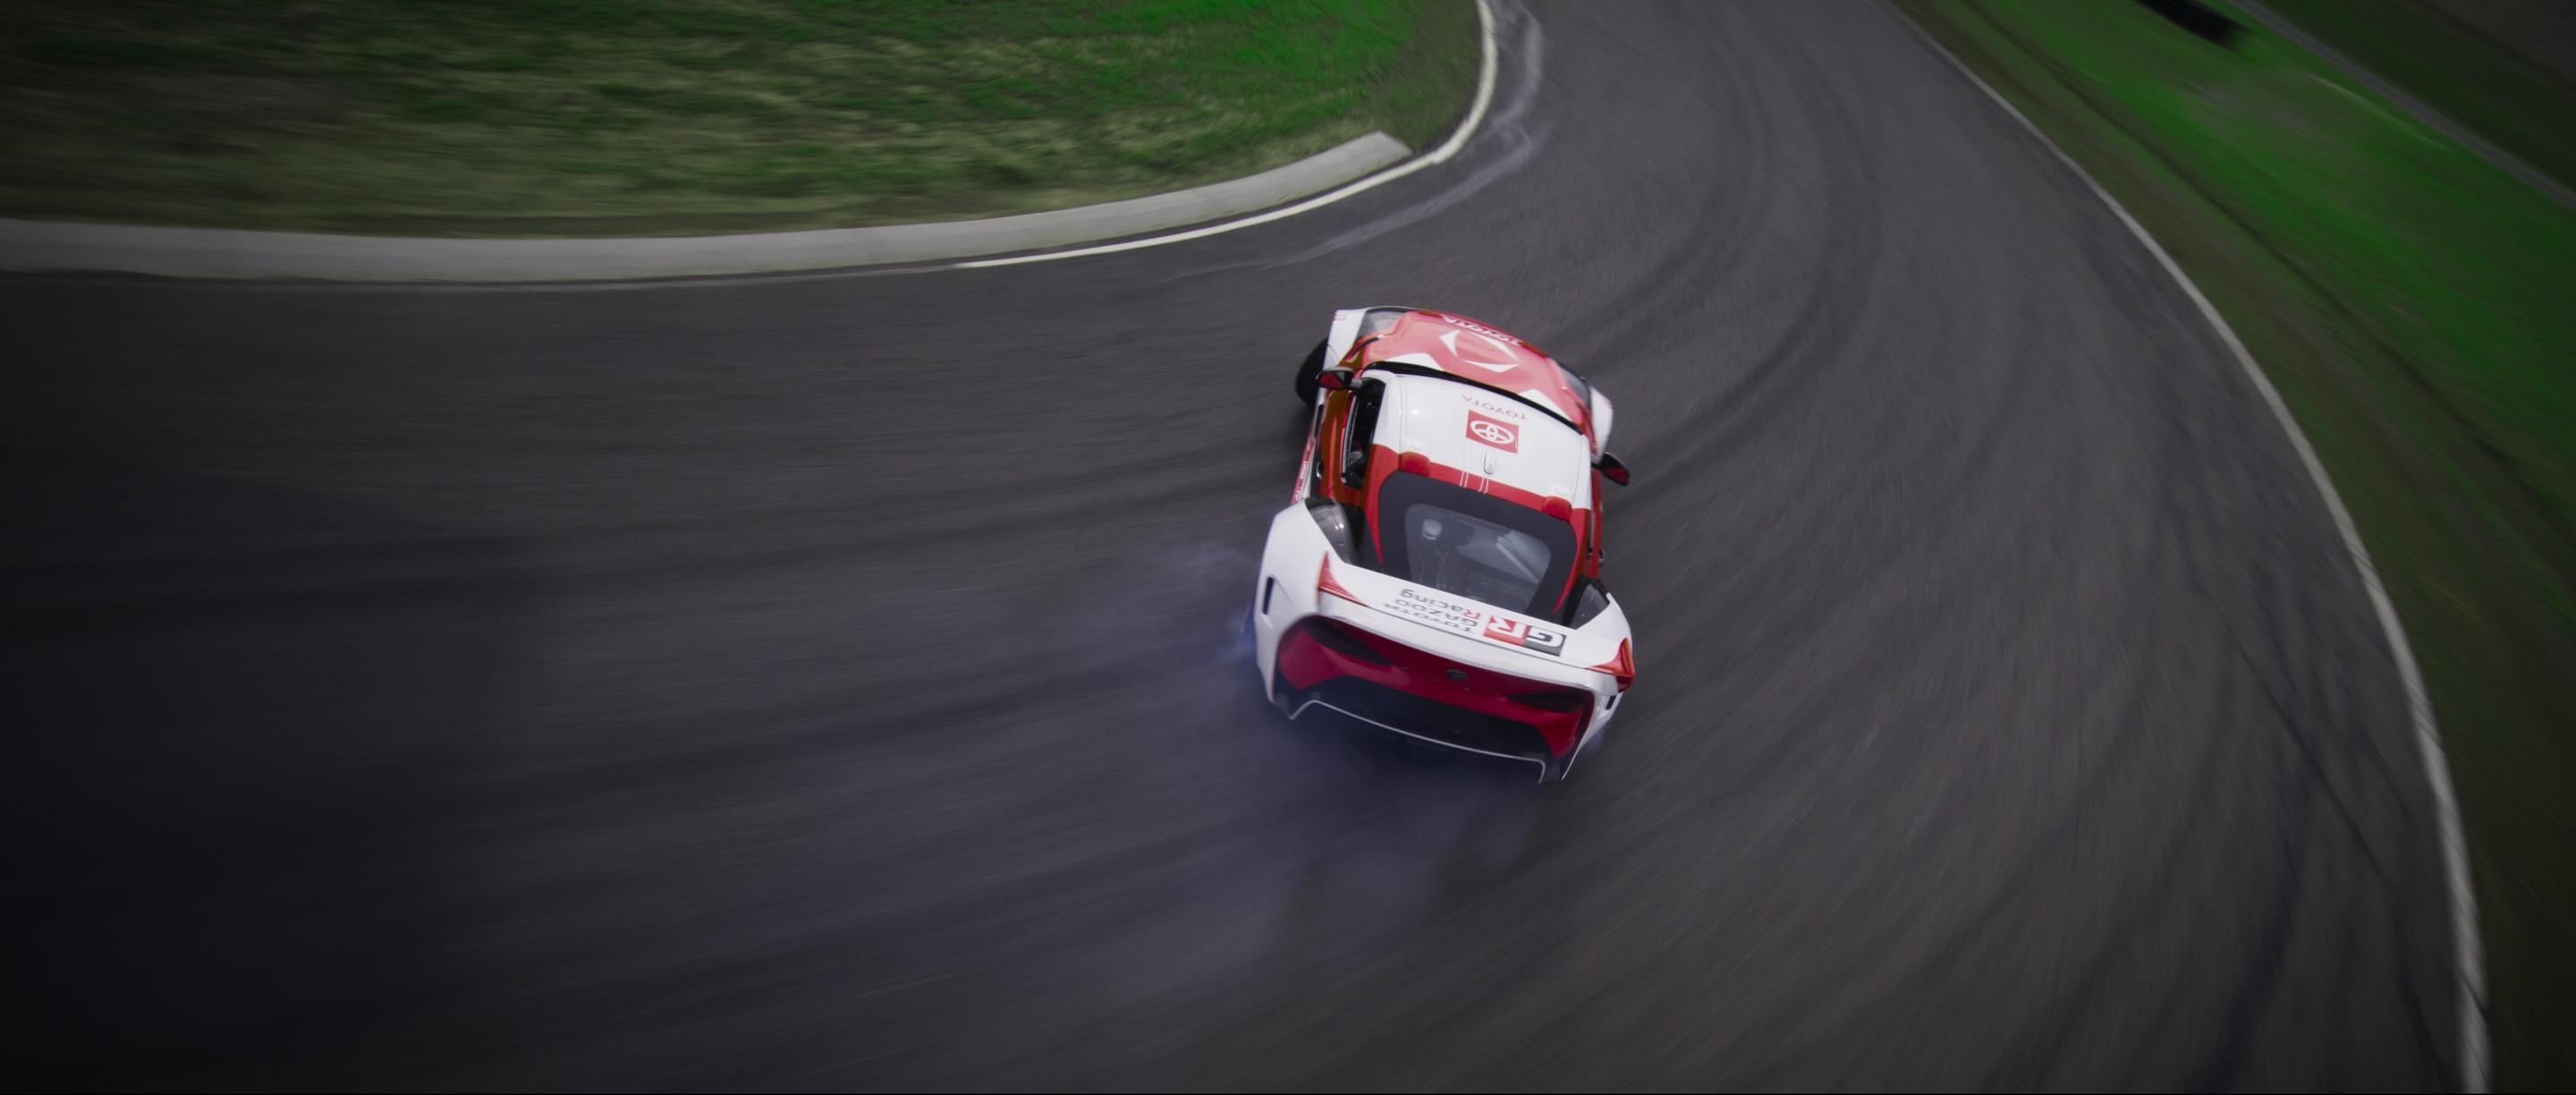 Self Drifting Toyota Supra Gets Sideways To Avoid On Track Obstacles